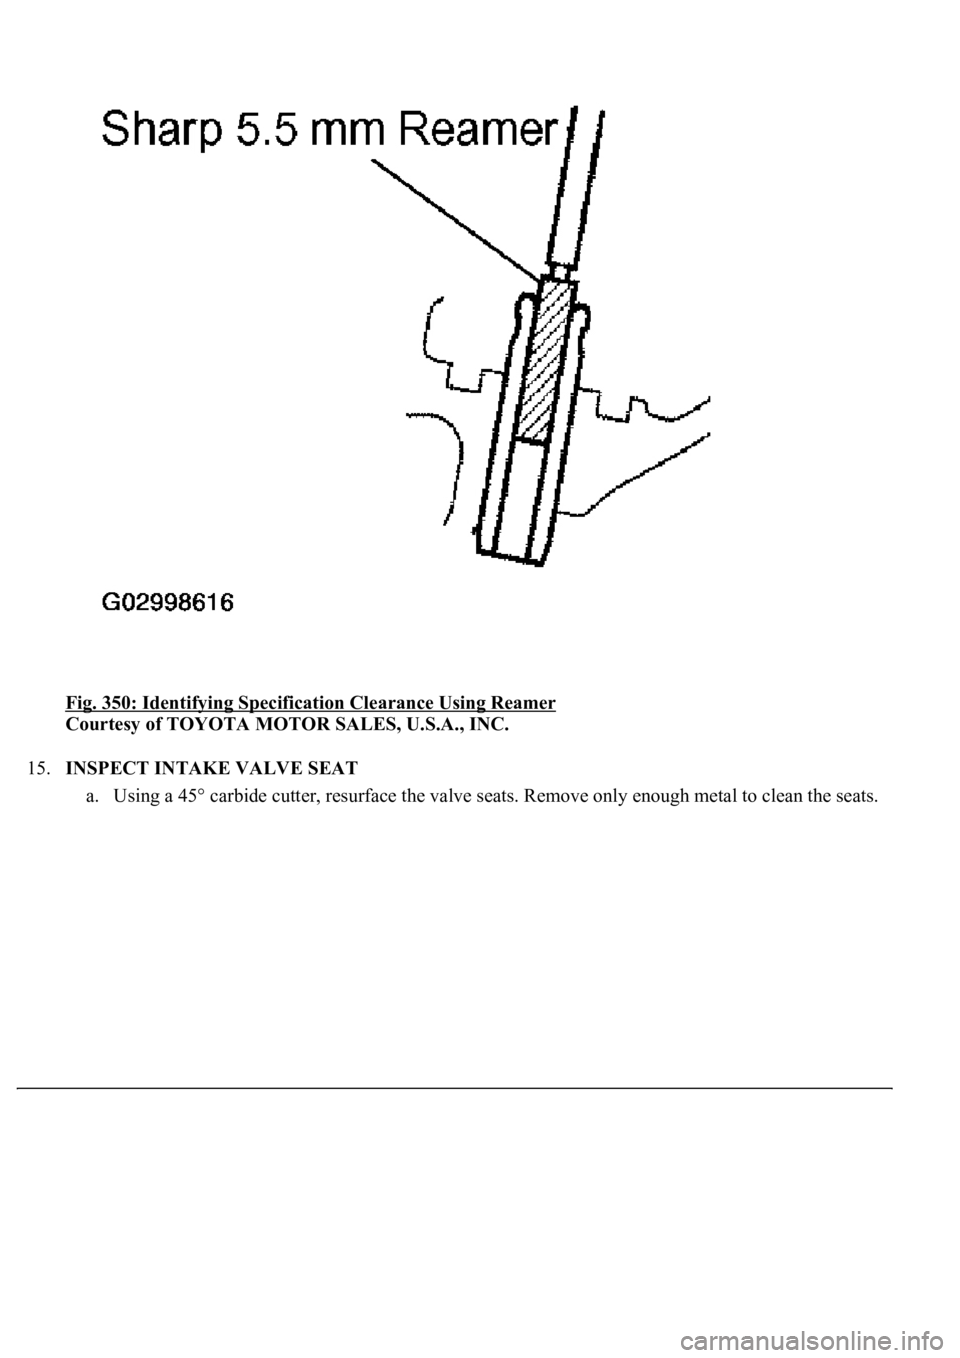 LEXUS LS430 2003  Factory Repair Manual Fig. 350: Identifying Specification Clearance Using Reamer 
Courtesy of TOYOTA MOTOR SALES, U.S.A., INC. 
15.INSPECT INTAKE VALVE SEAT 
a. Usin
g a 45° carbide cutter, resurface the valve seats. Remo